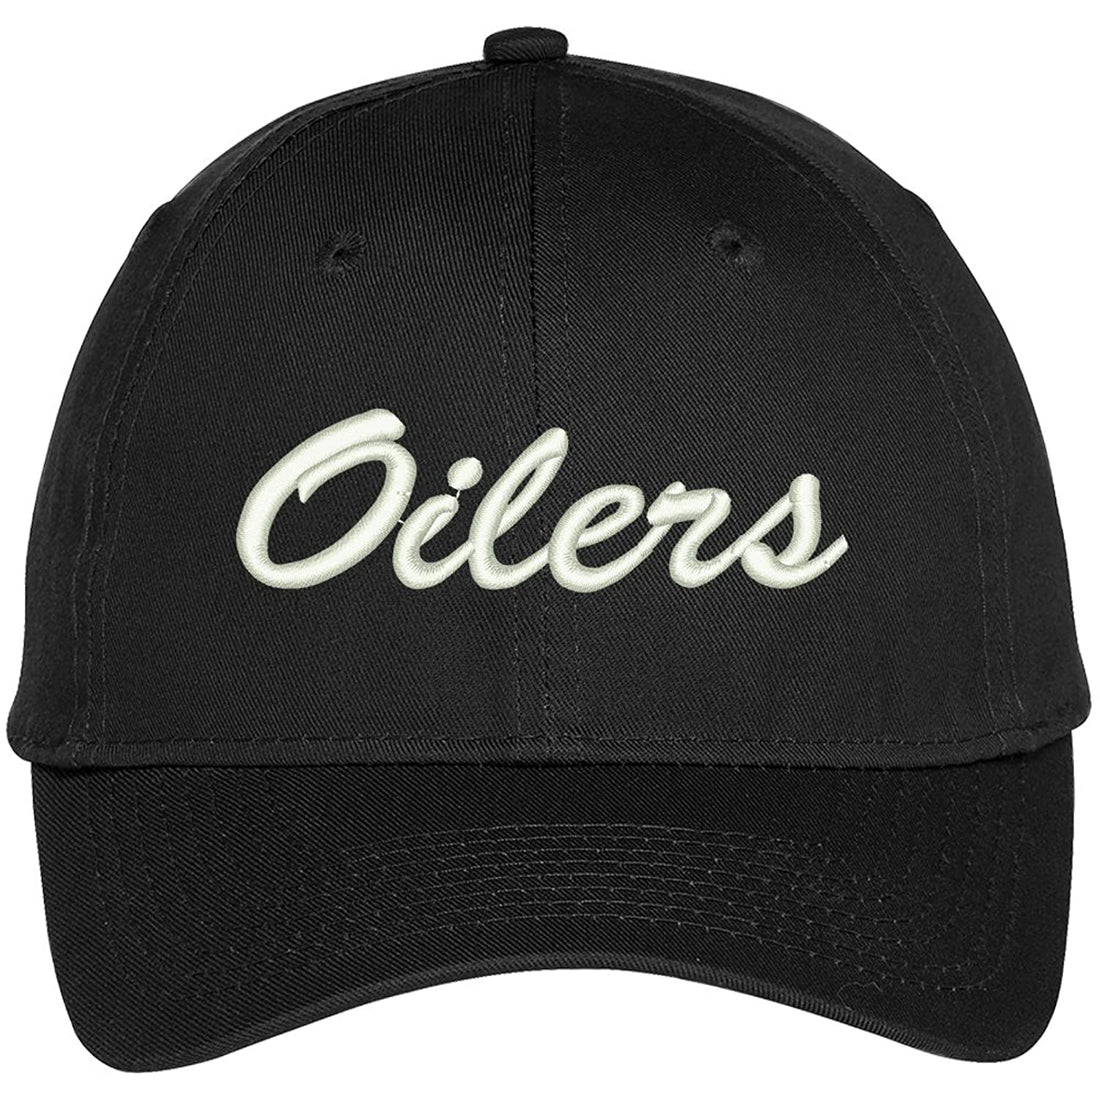 Trendy Apparel Shop Oilers Embroidered Precurved Adjustable Cap